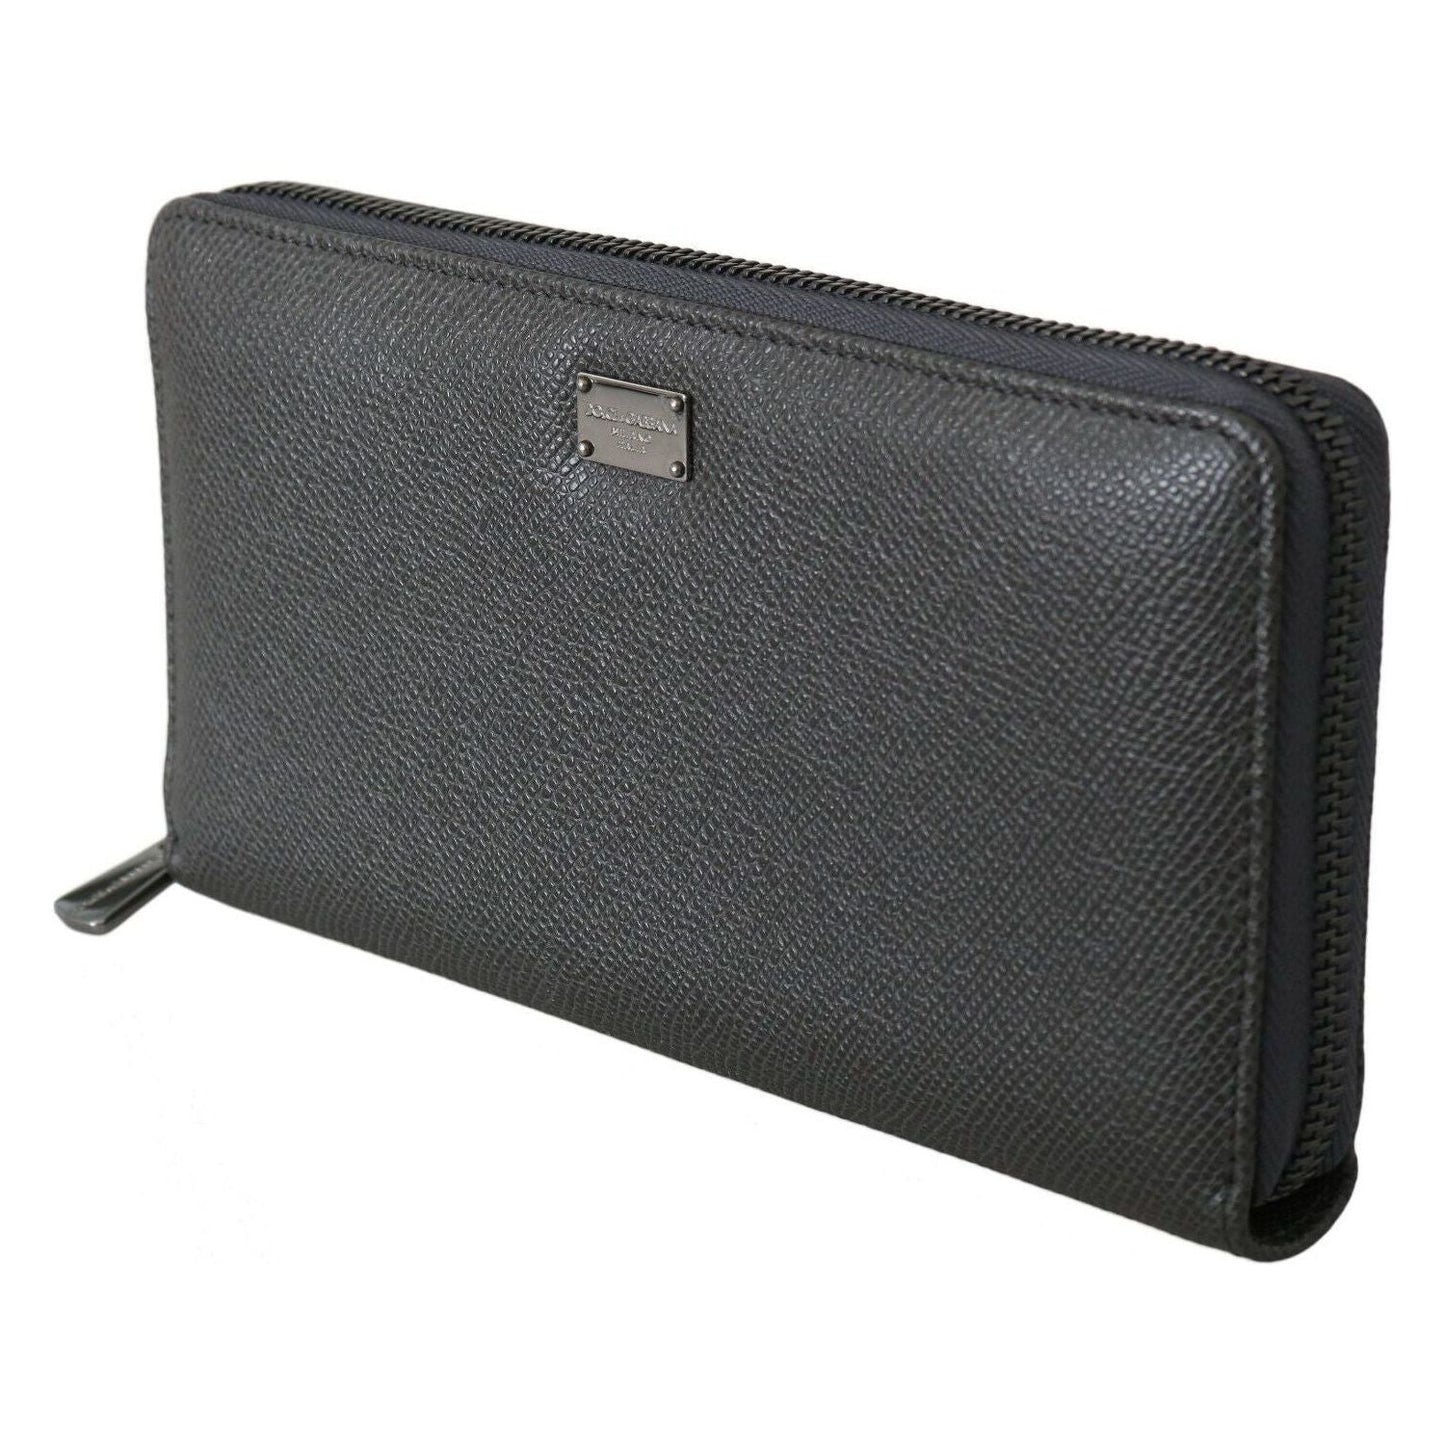 Dolce & Gabbana Elegant Continental Leather Wallet gray-leather-zipper-continental-bill-card-coin-wallet s-l1600-2022-12-15T153844.278-38effc81-49d.jpg